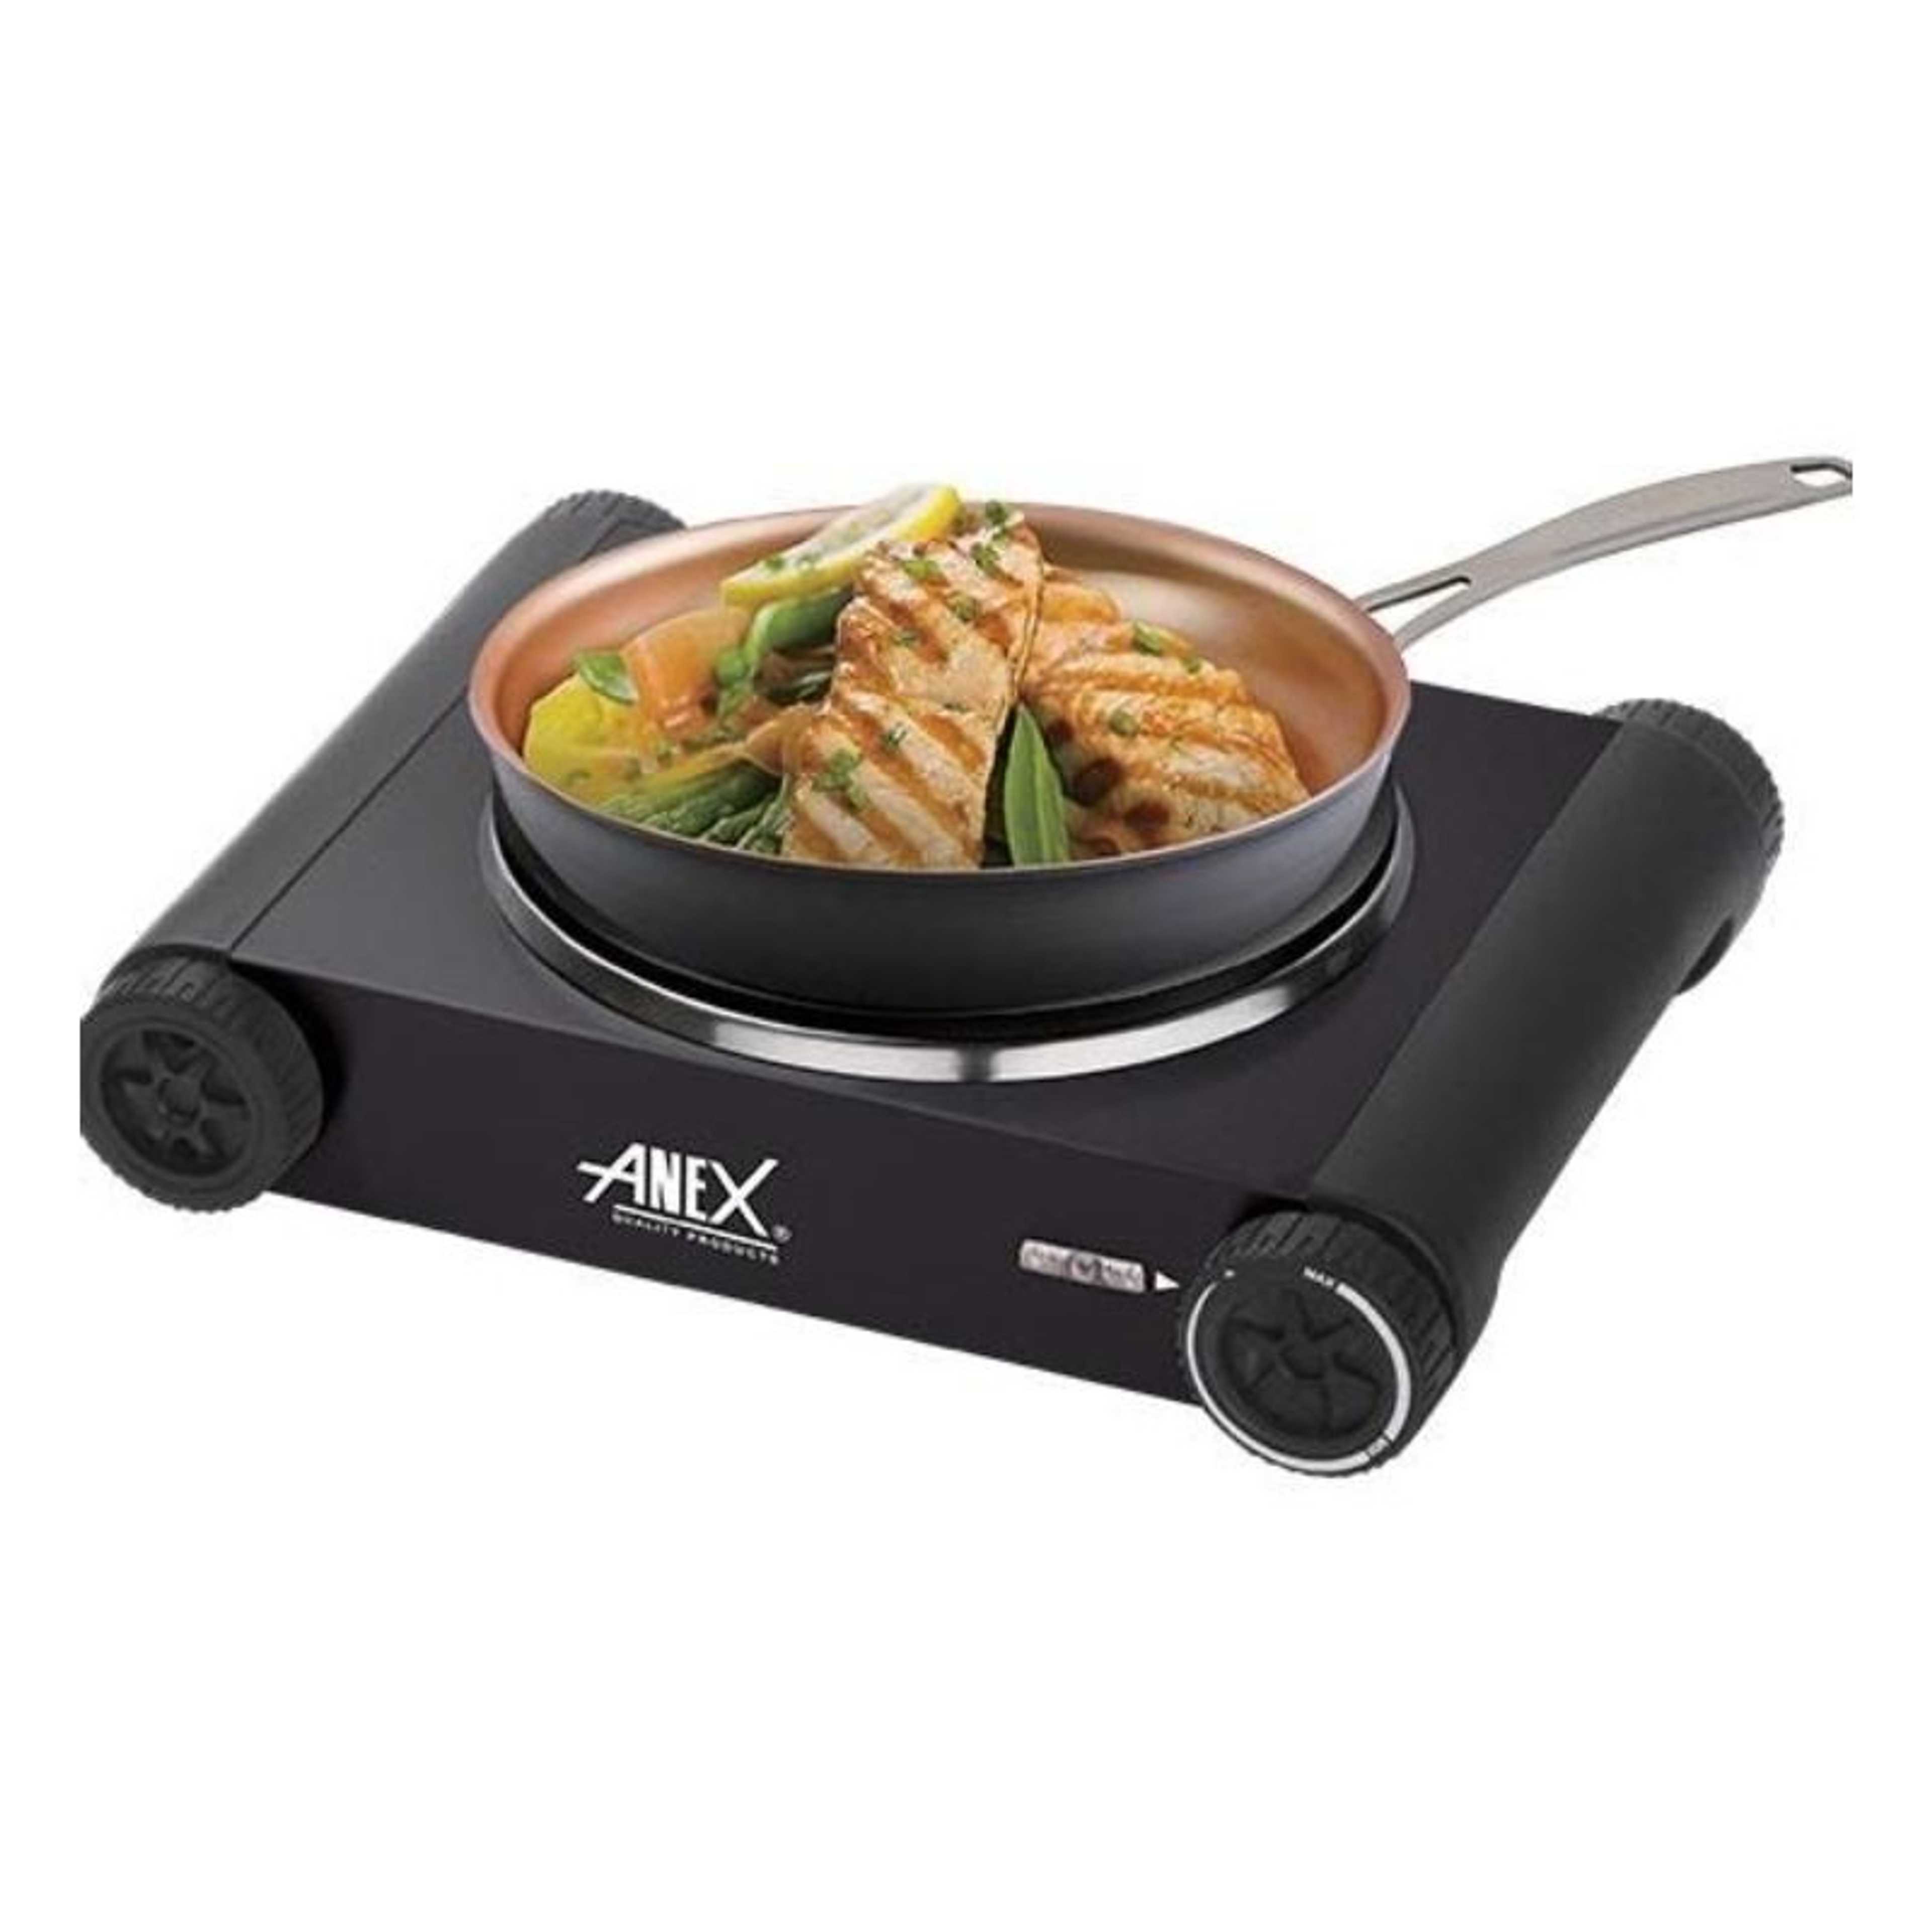 ANEX AG-2061 Deluxe Hot Plate | Kitchen Appliance